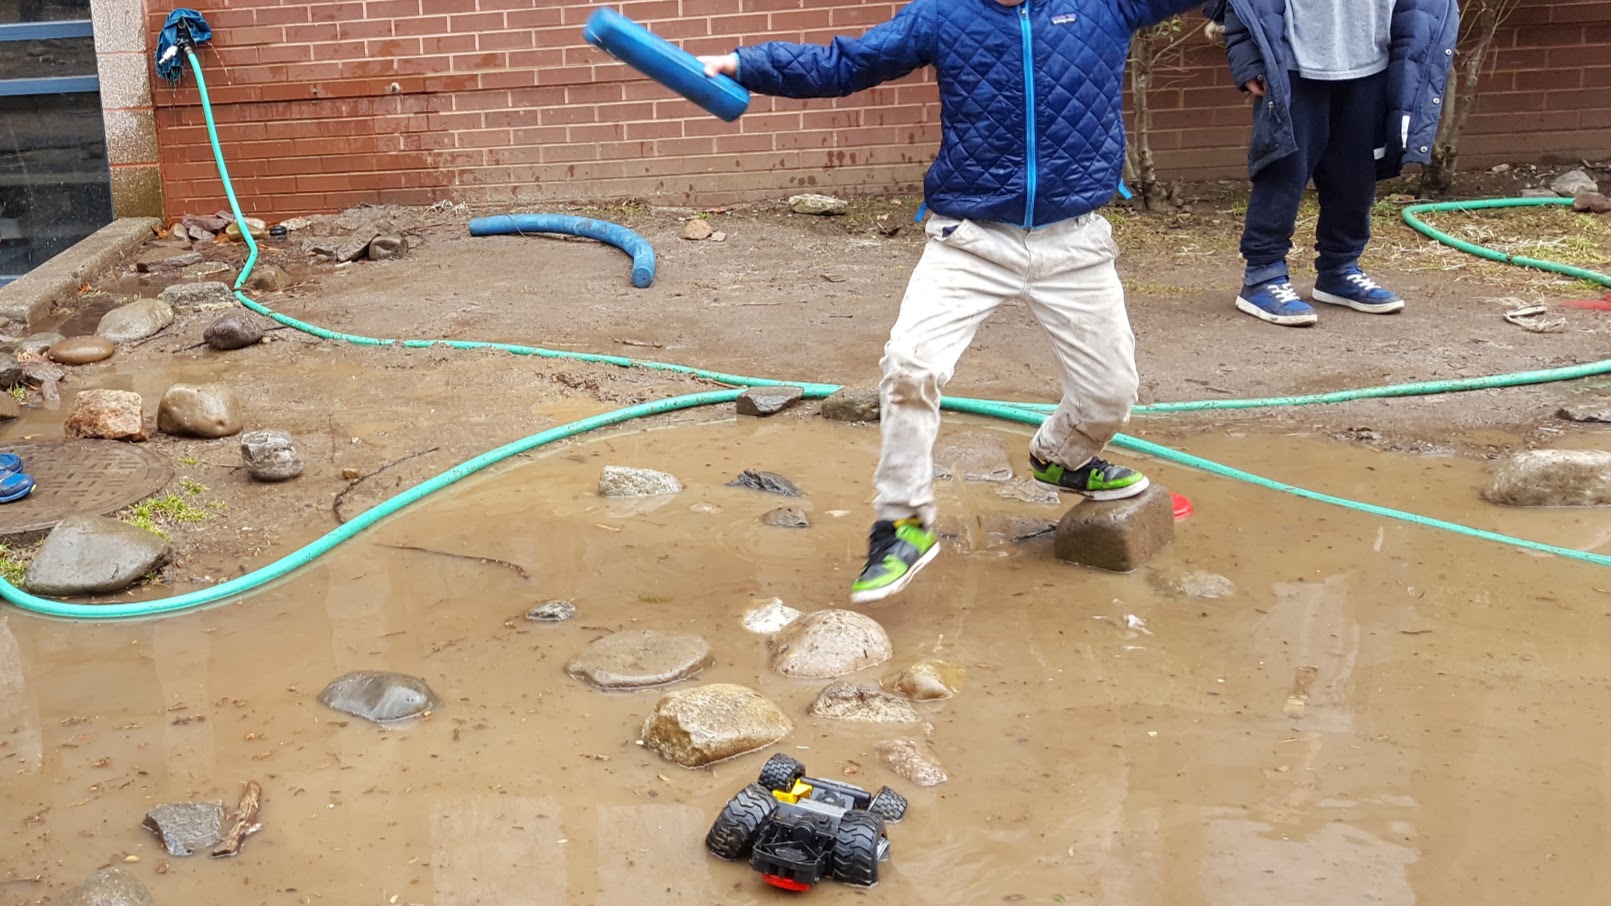  A child steps gingerly from one rock to another, maneuvering above a flooded muddy area. Another child stands on not flooded ground nearby, and a green hose snakes its way around the background of the image, and a toy truck sits partly submerged in 